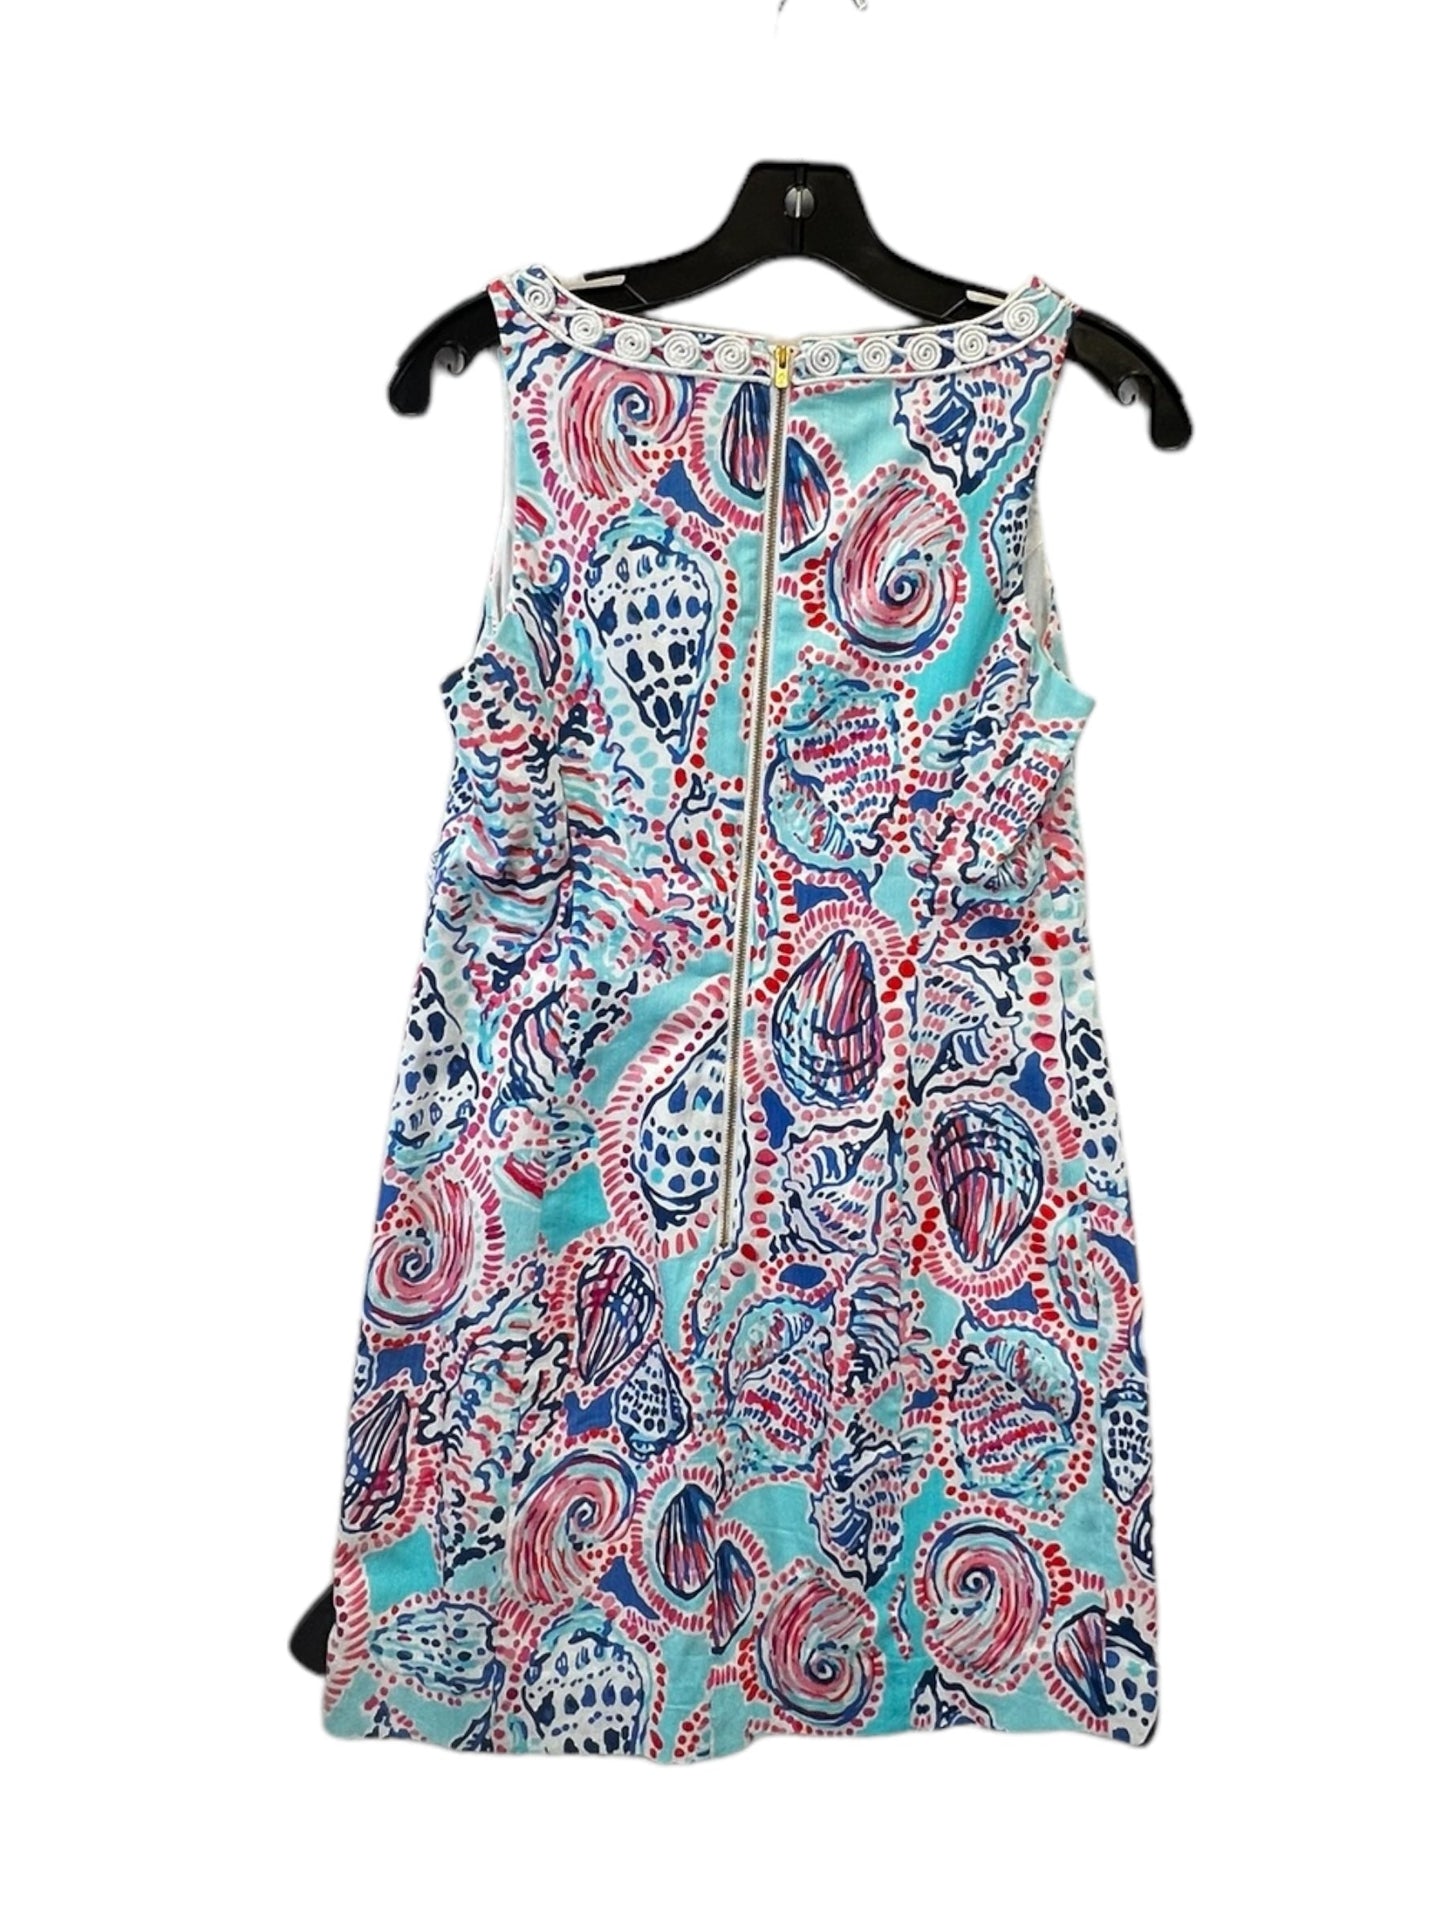 Blue & Pink Dress Casual Midi Lilly Pulitzer, Size 0